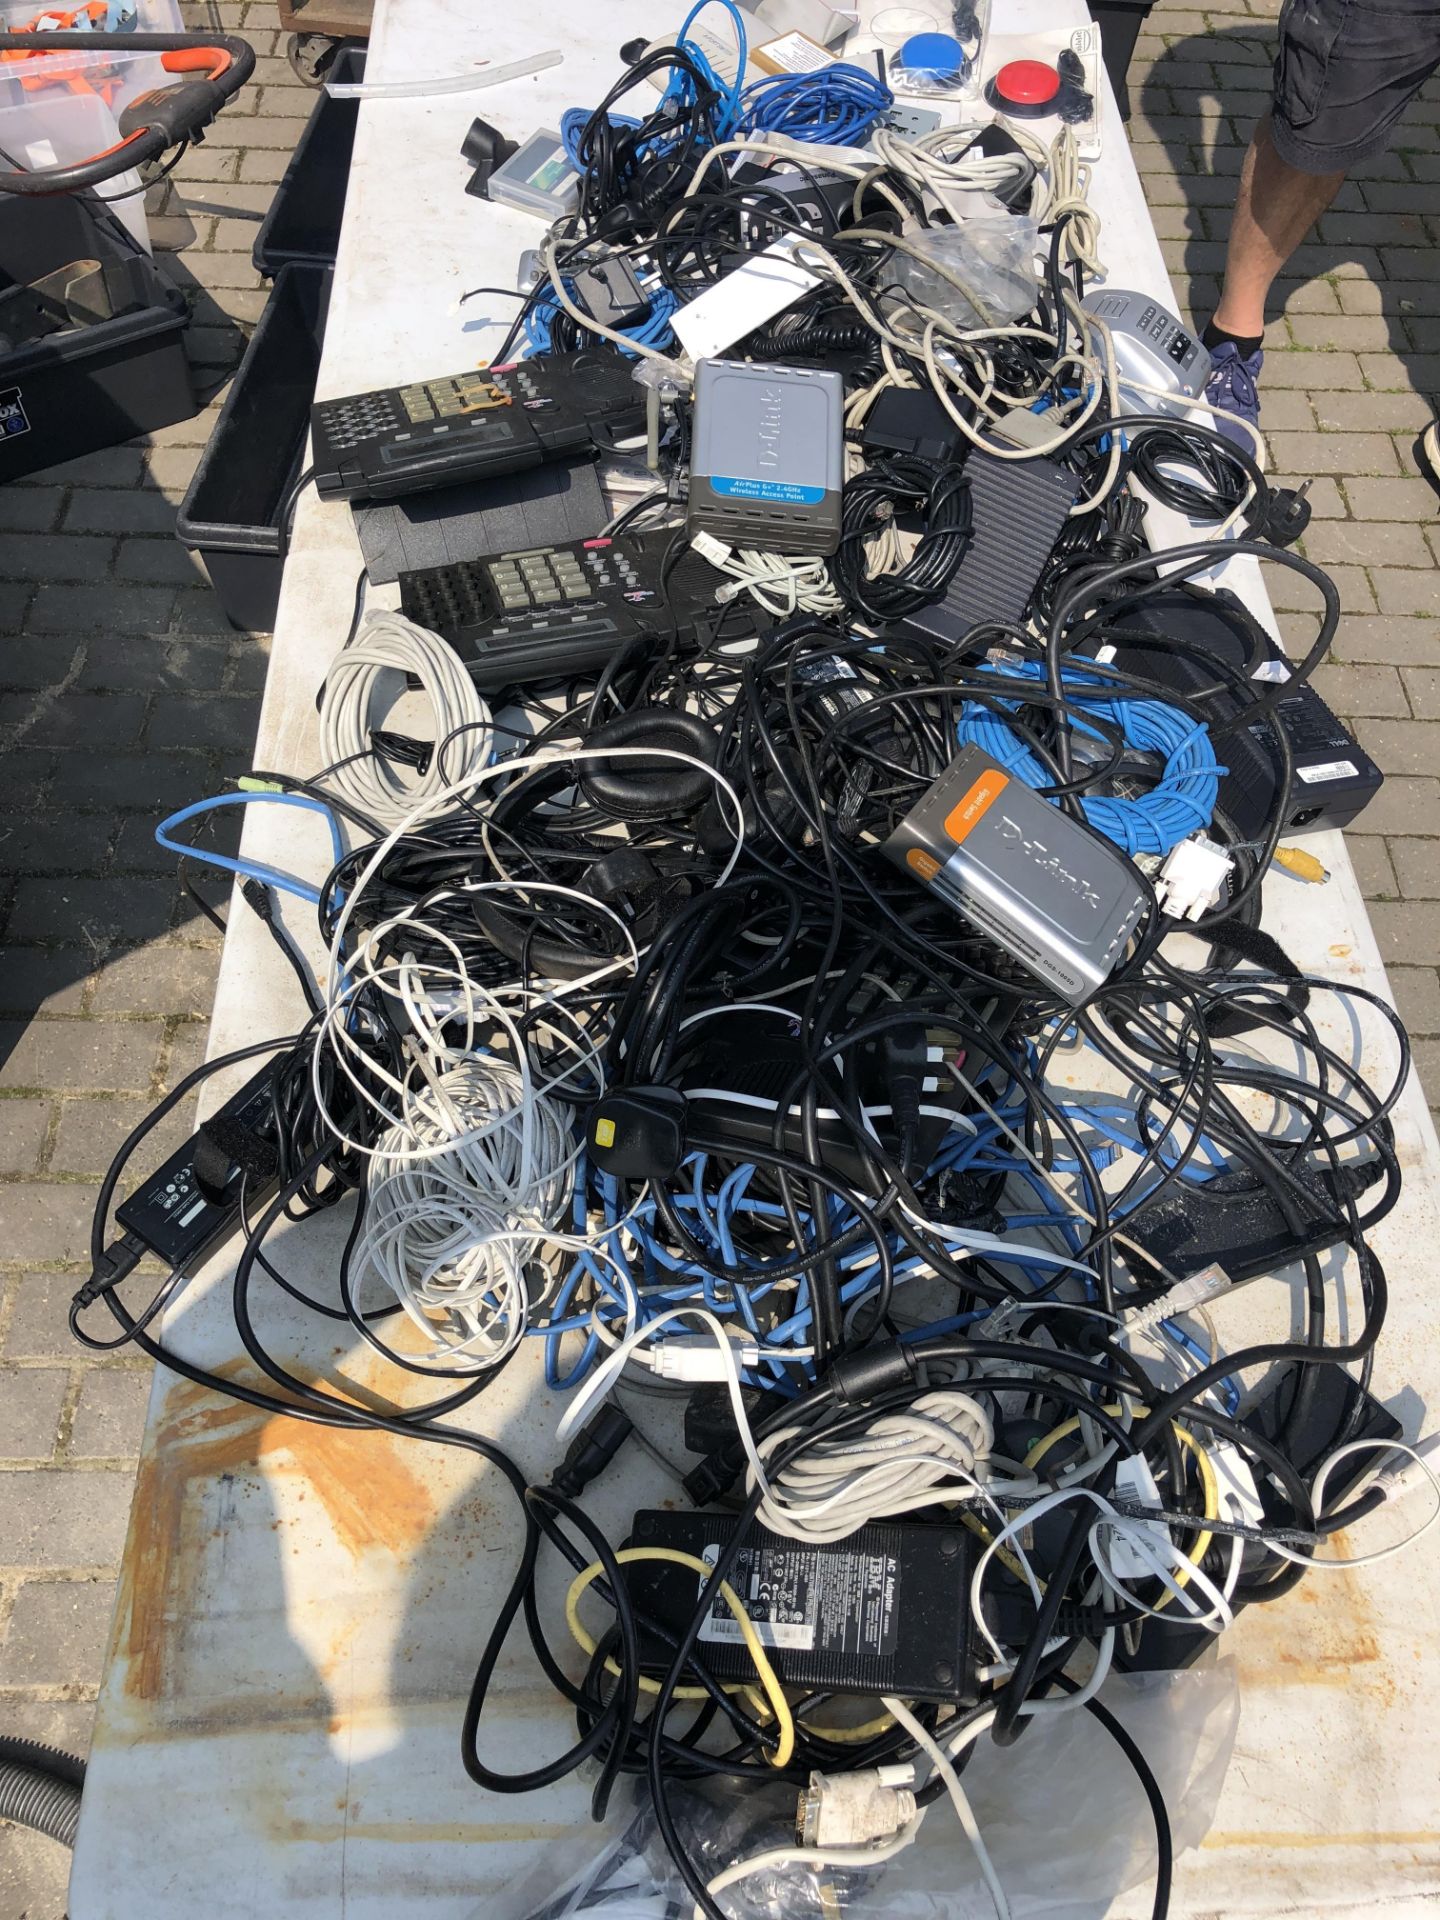 JOB LOT OF OFFICE EQUIPMENT INCLUDES PHONES MODEMS ETHERNET CABLES LAPTOP CHARGERS ETC